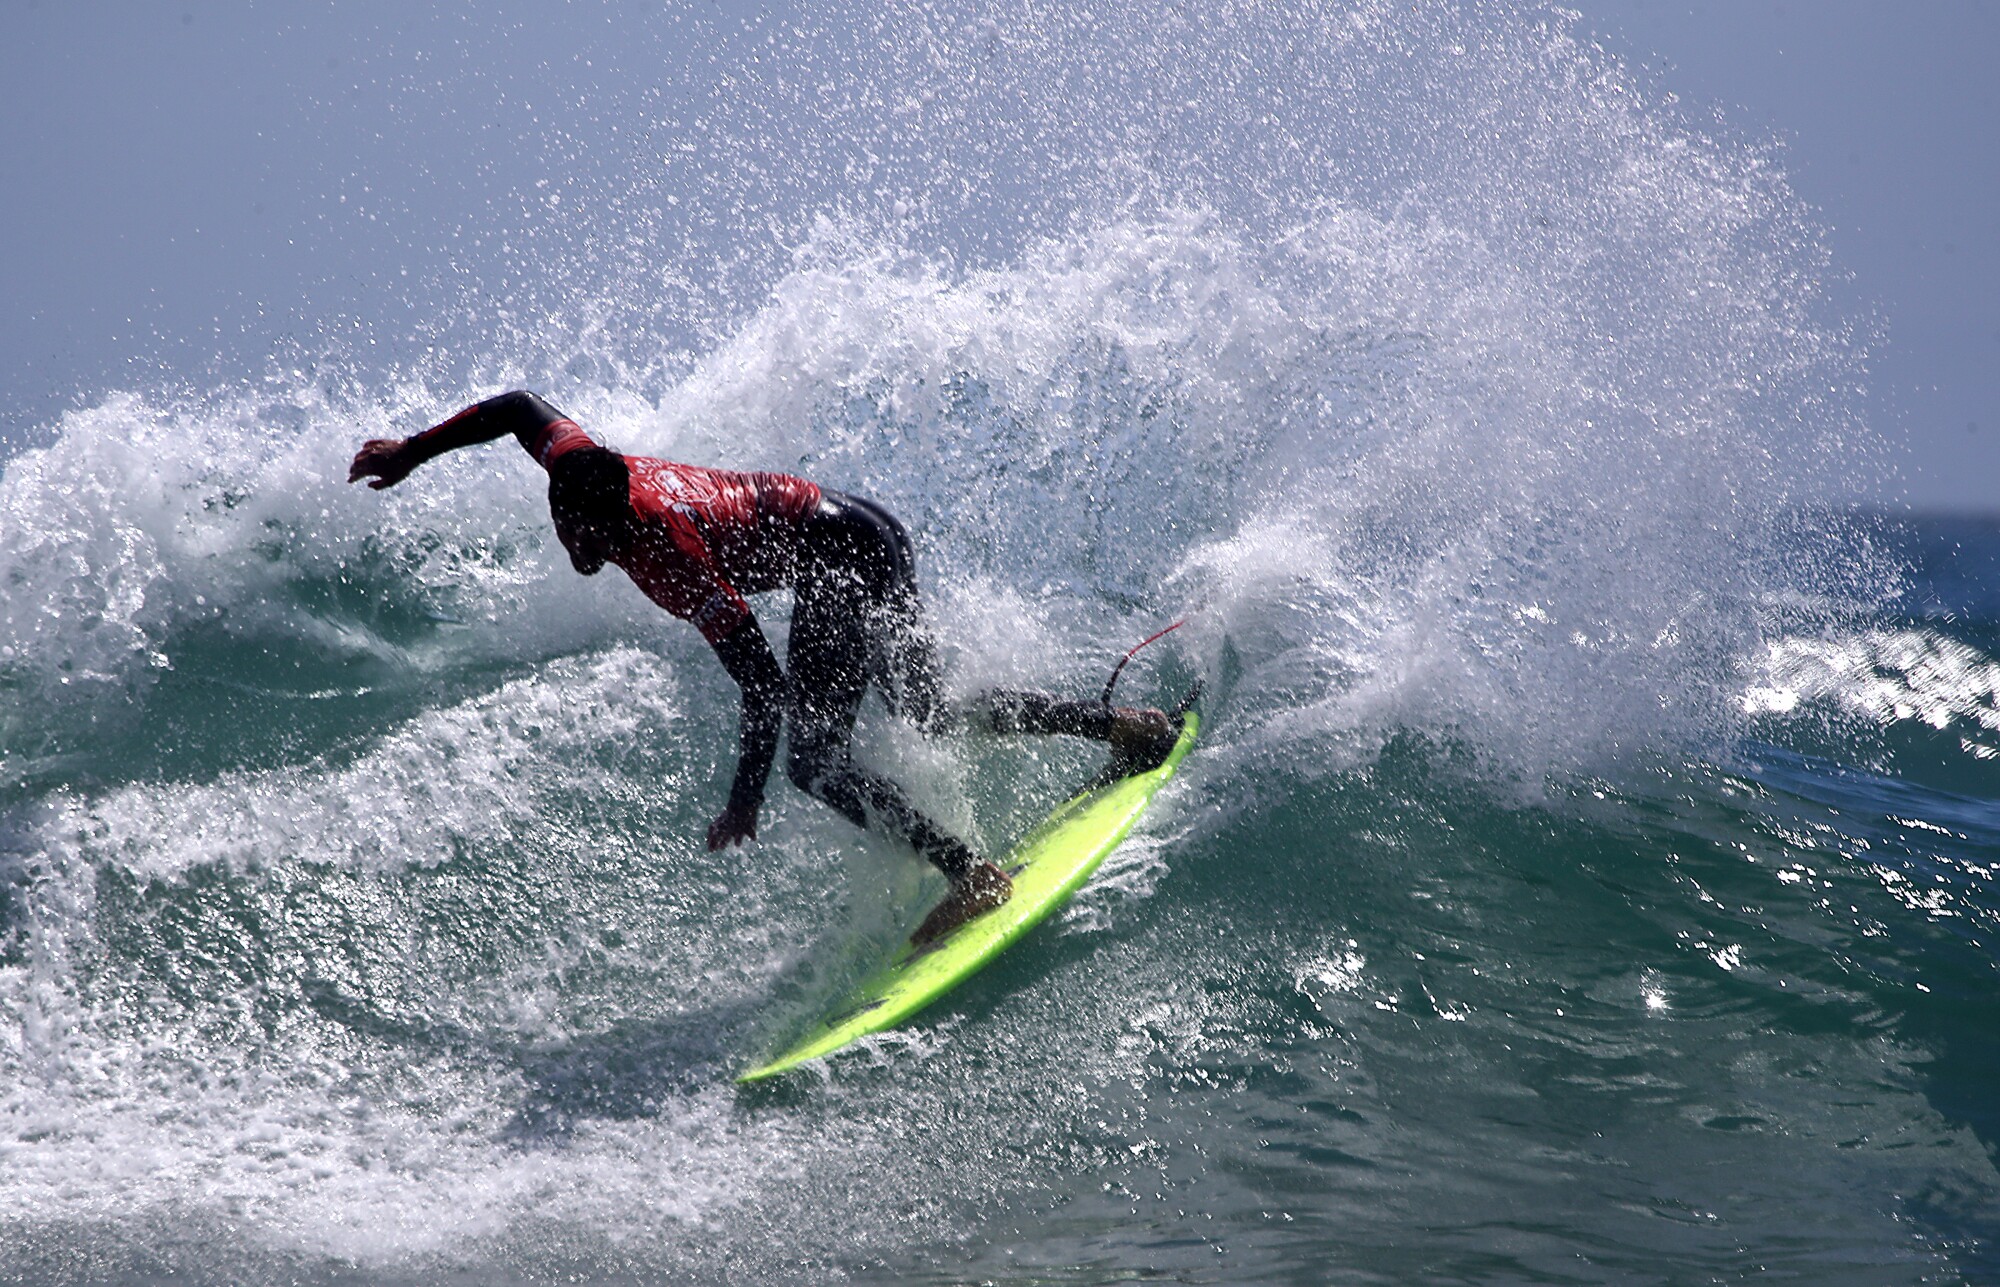 Ezekiel Lau competes in the finals of the US Open of Surfing.